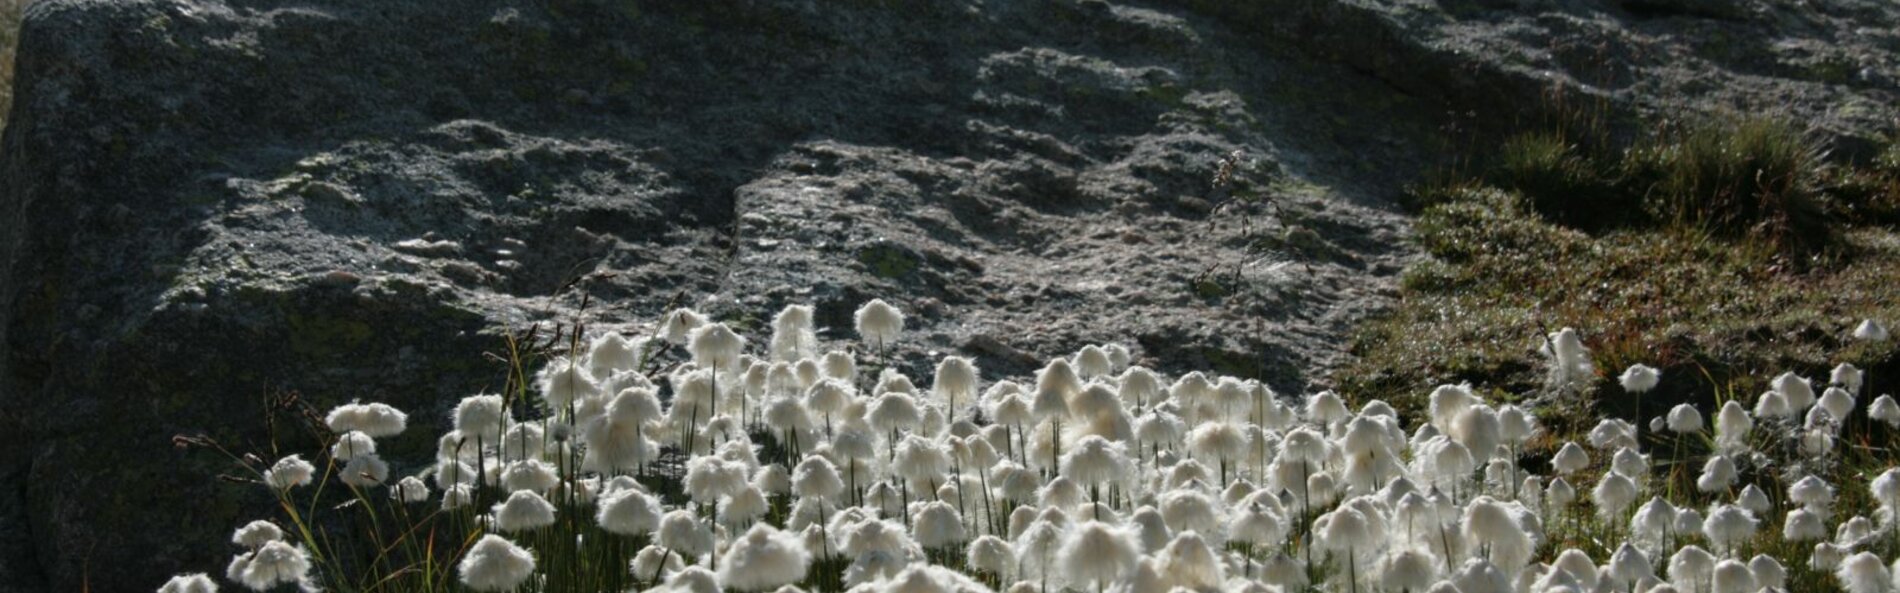 Photo of white fluffy flowers with black rocks in background.